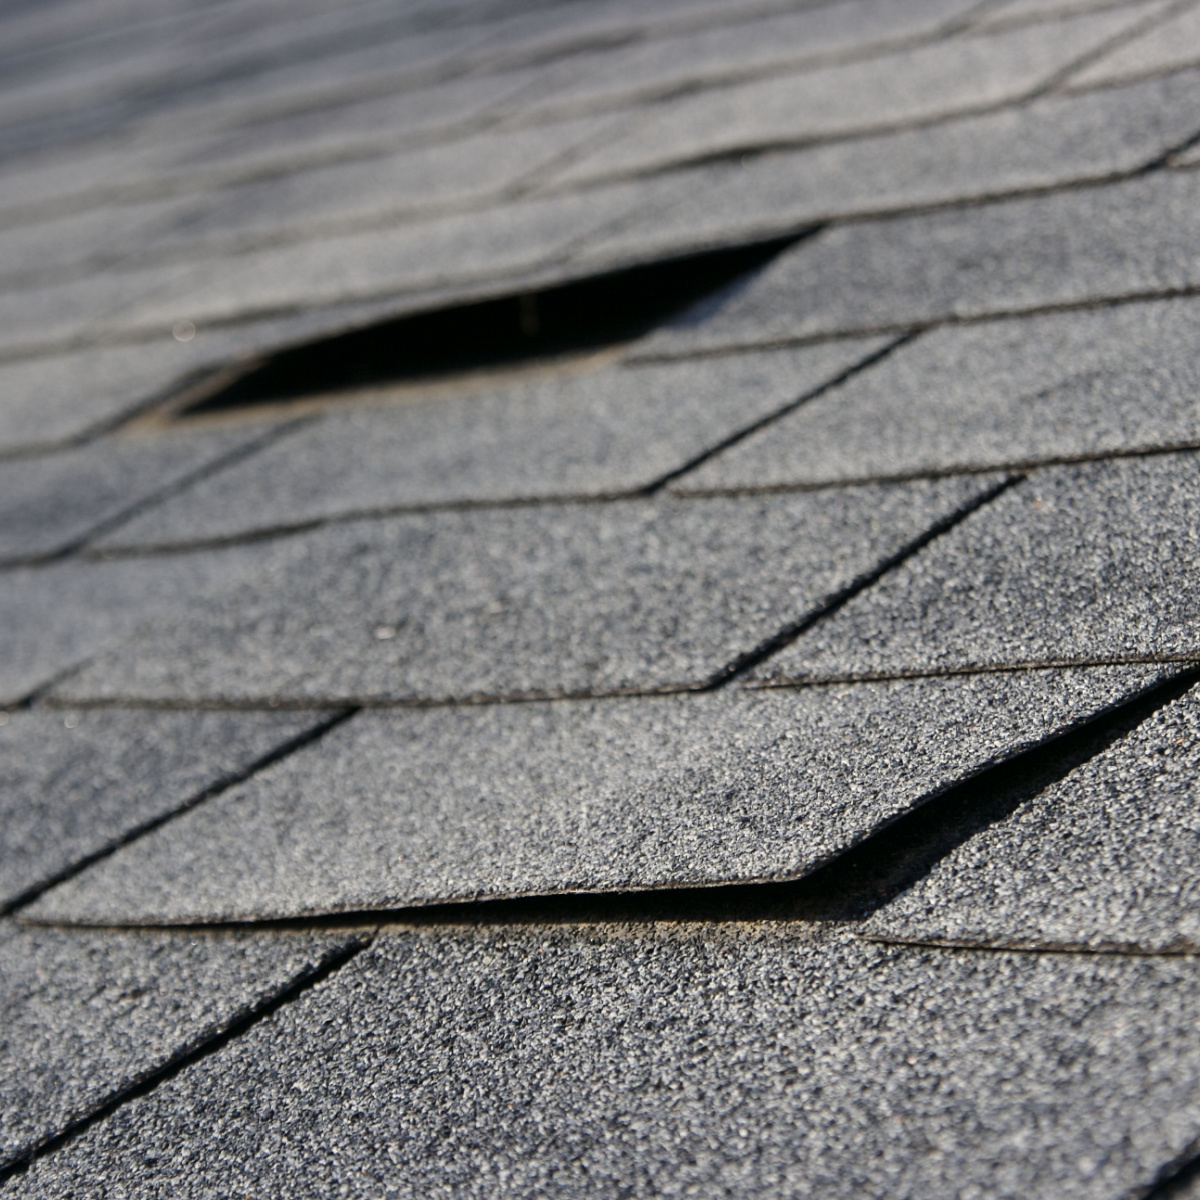 Houston roof damage that could merit a Houston roof replacement conducted by Houston roof experts.